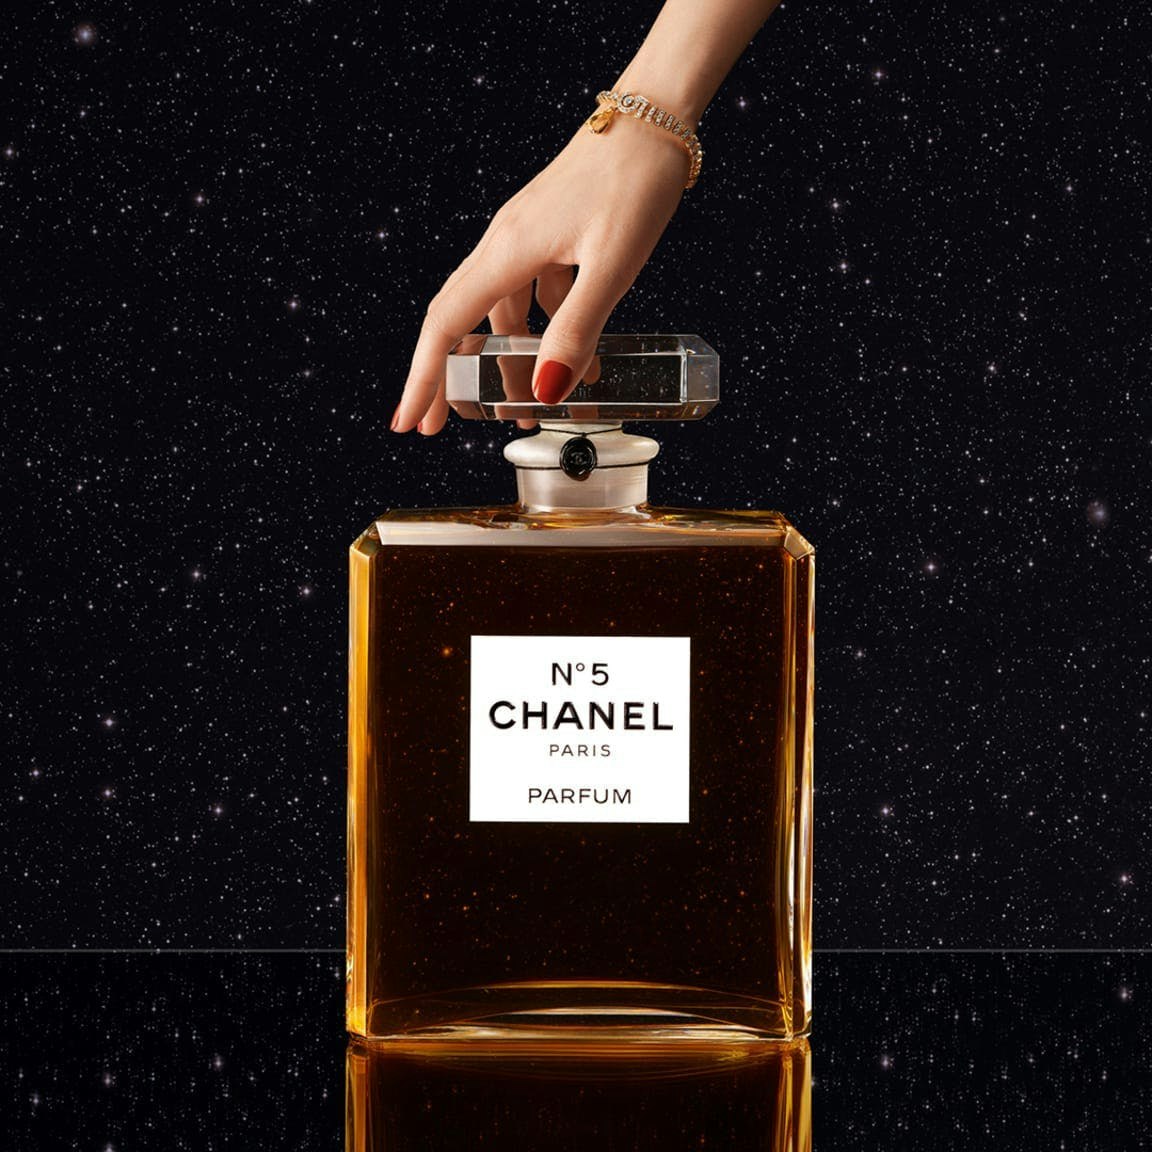 This is the Largest Chanel Perfume N°5 Bottle Ever Produced — Coco